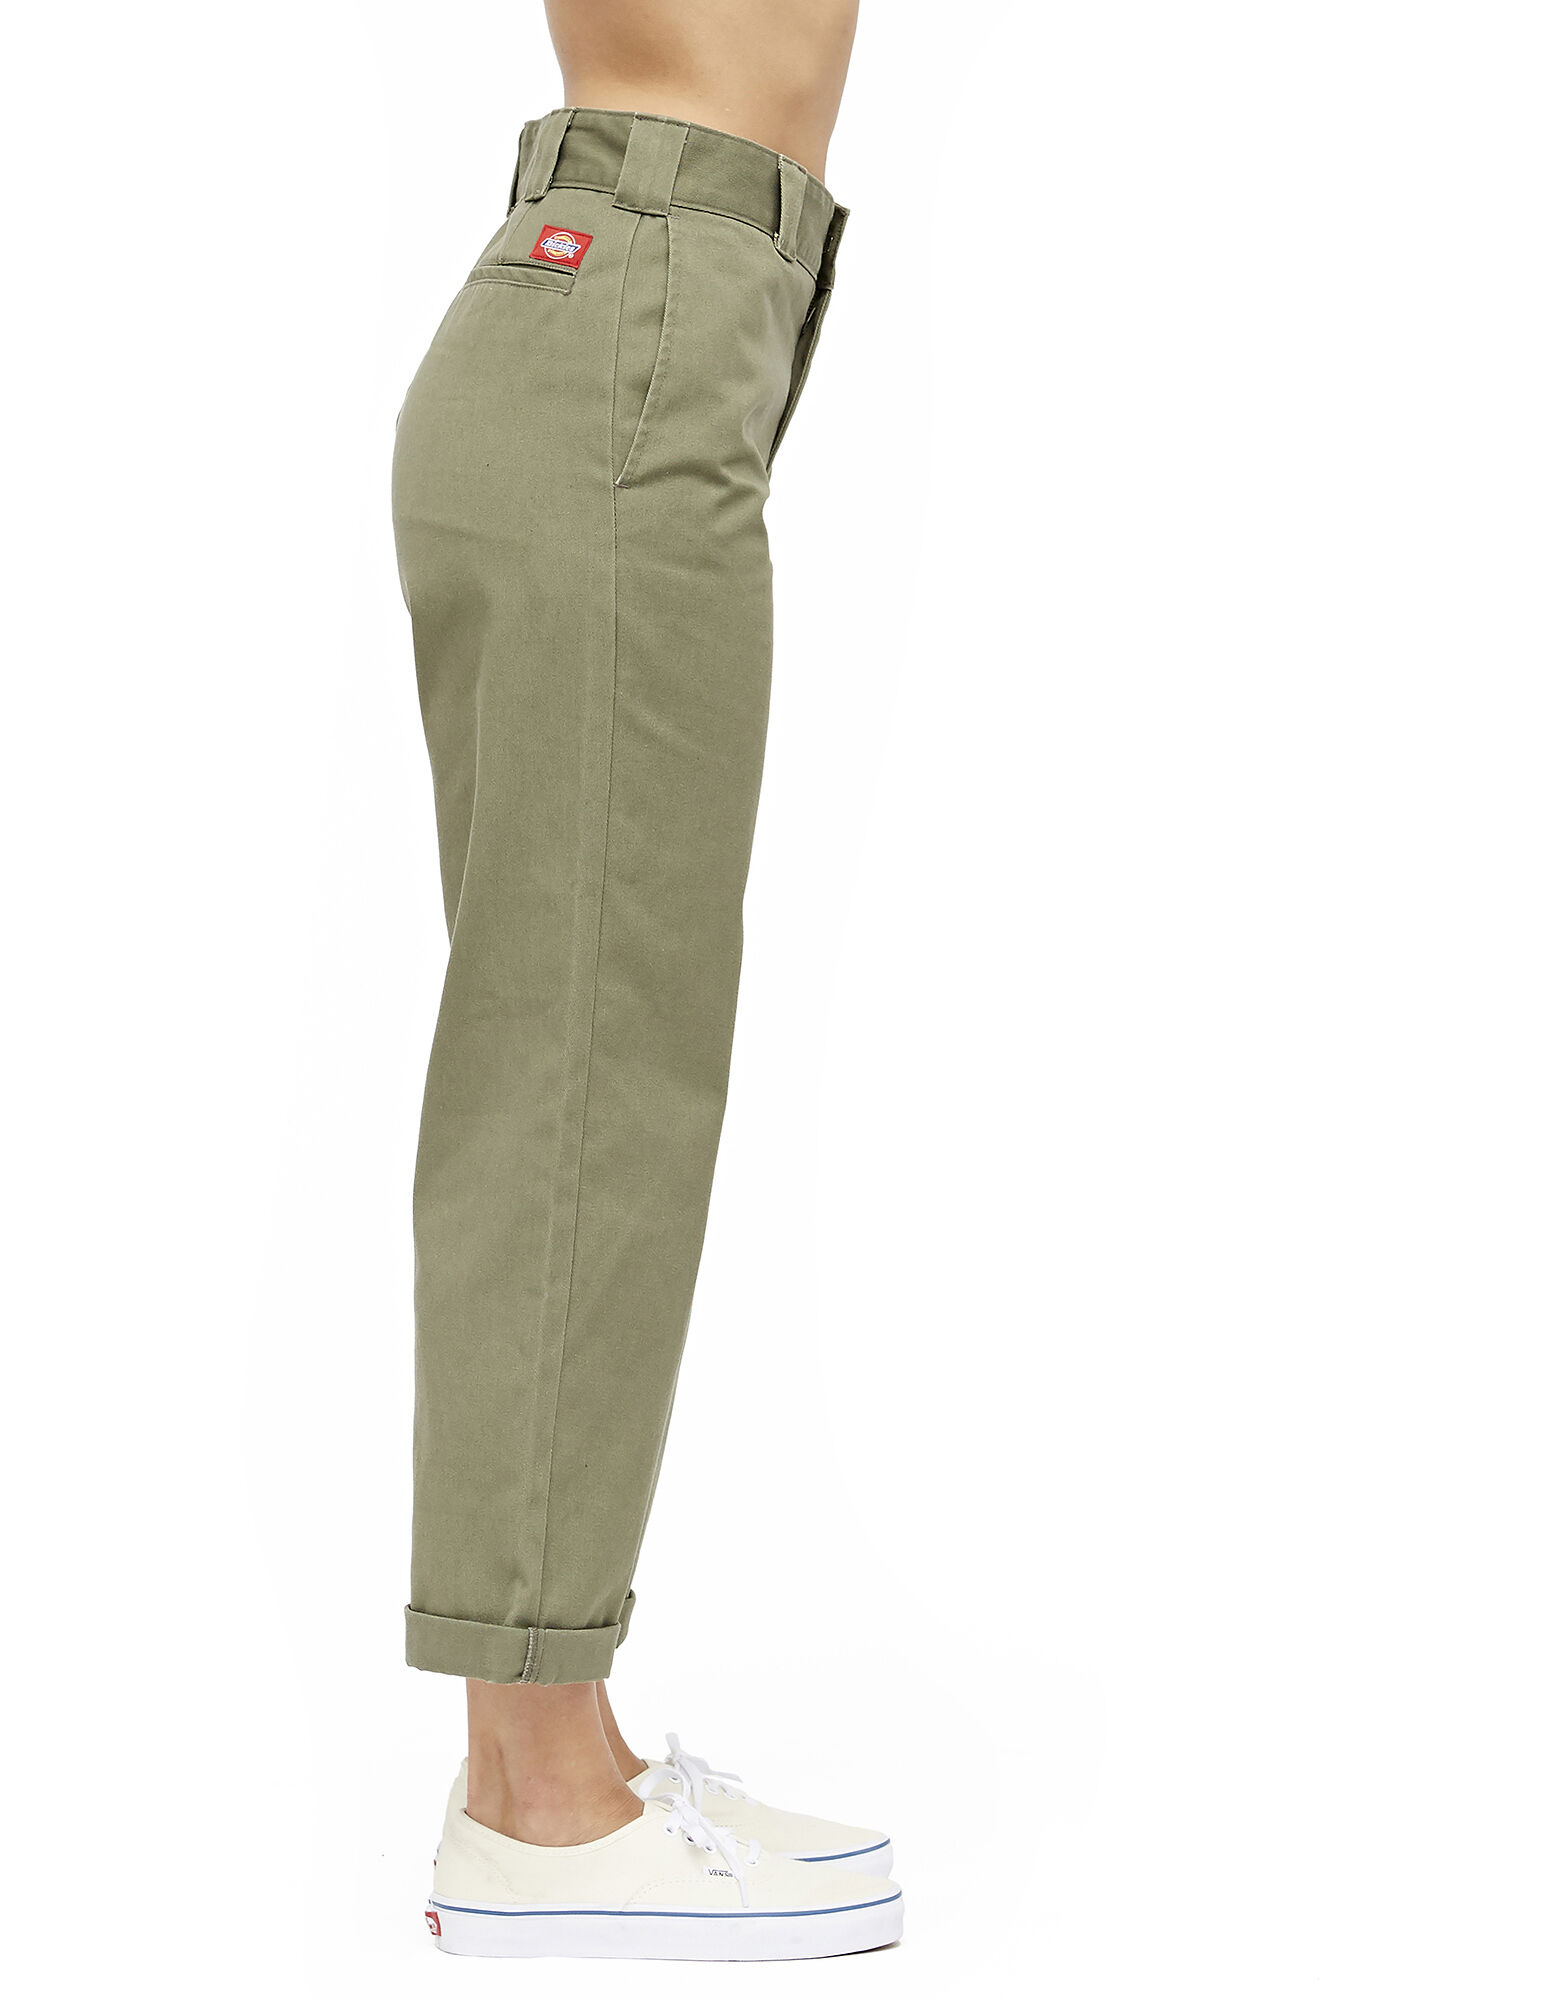 Khaki Details about  / Dickies Juniors’ Crop Work Pant Twill High Rise Relaxed